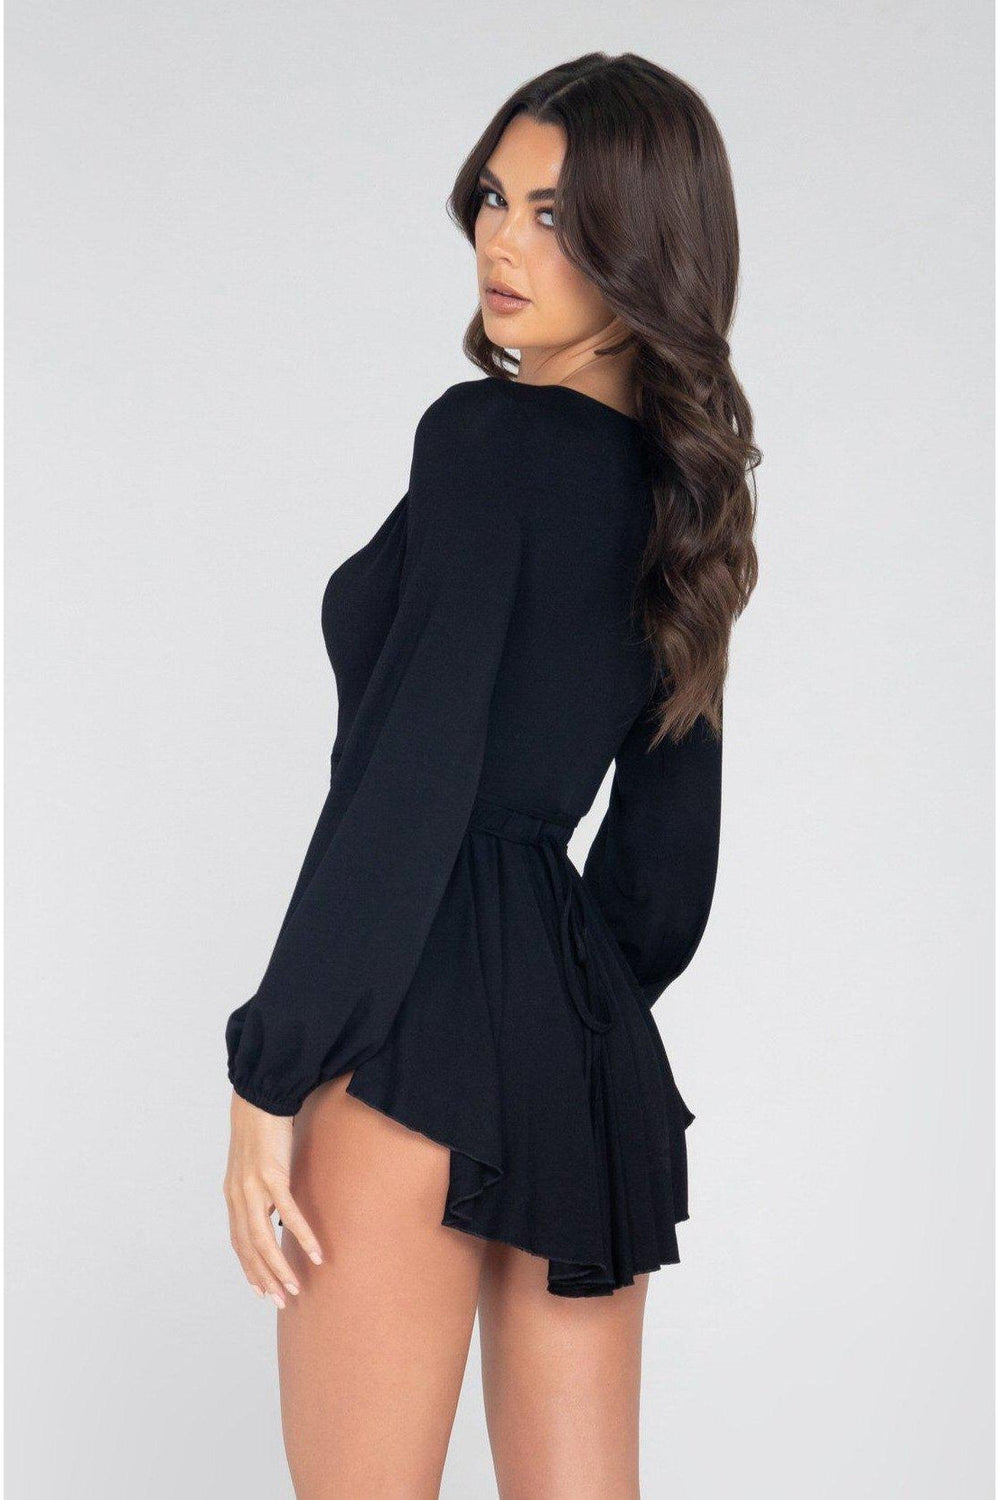 Long Sleeve Skater Dress with Criss-Cross Strap-Club Dresses-Roma Confidential-SEXYSHOES.COM